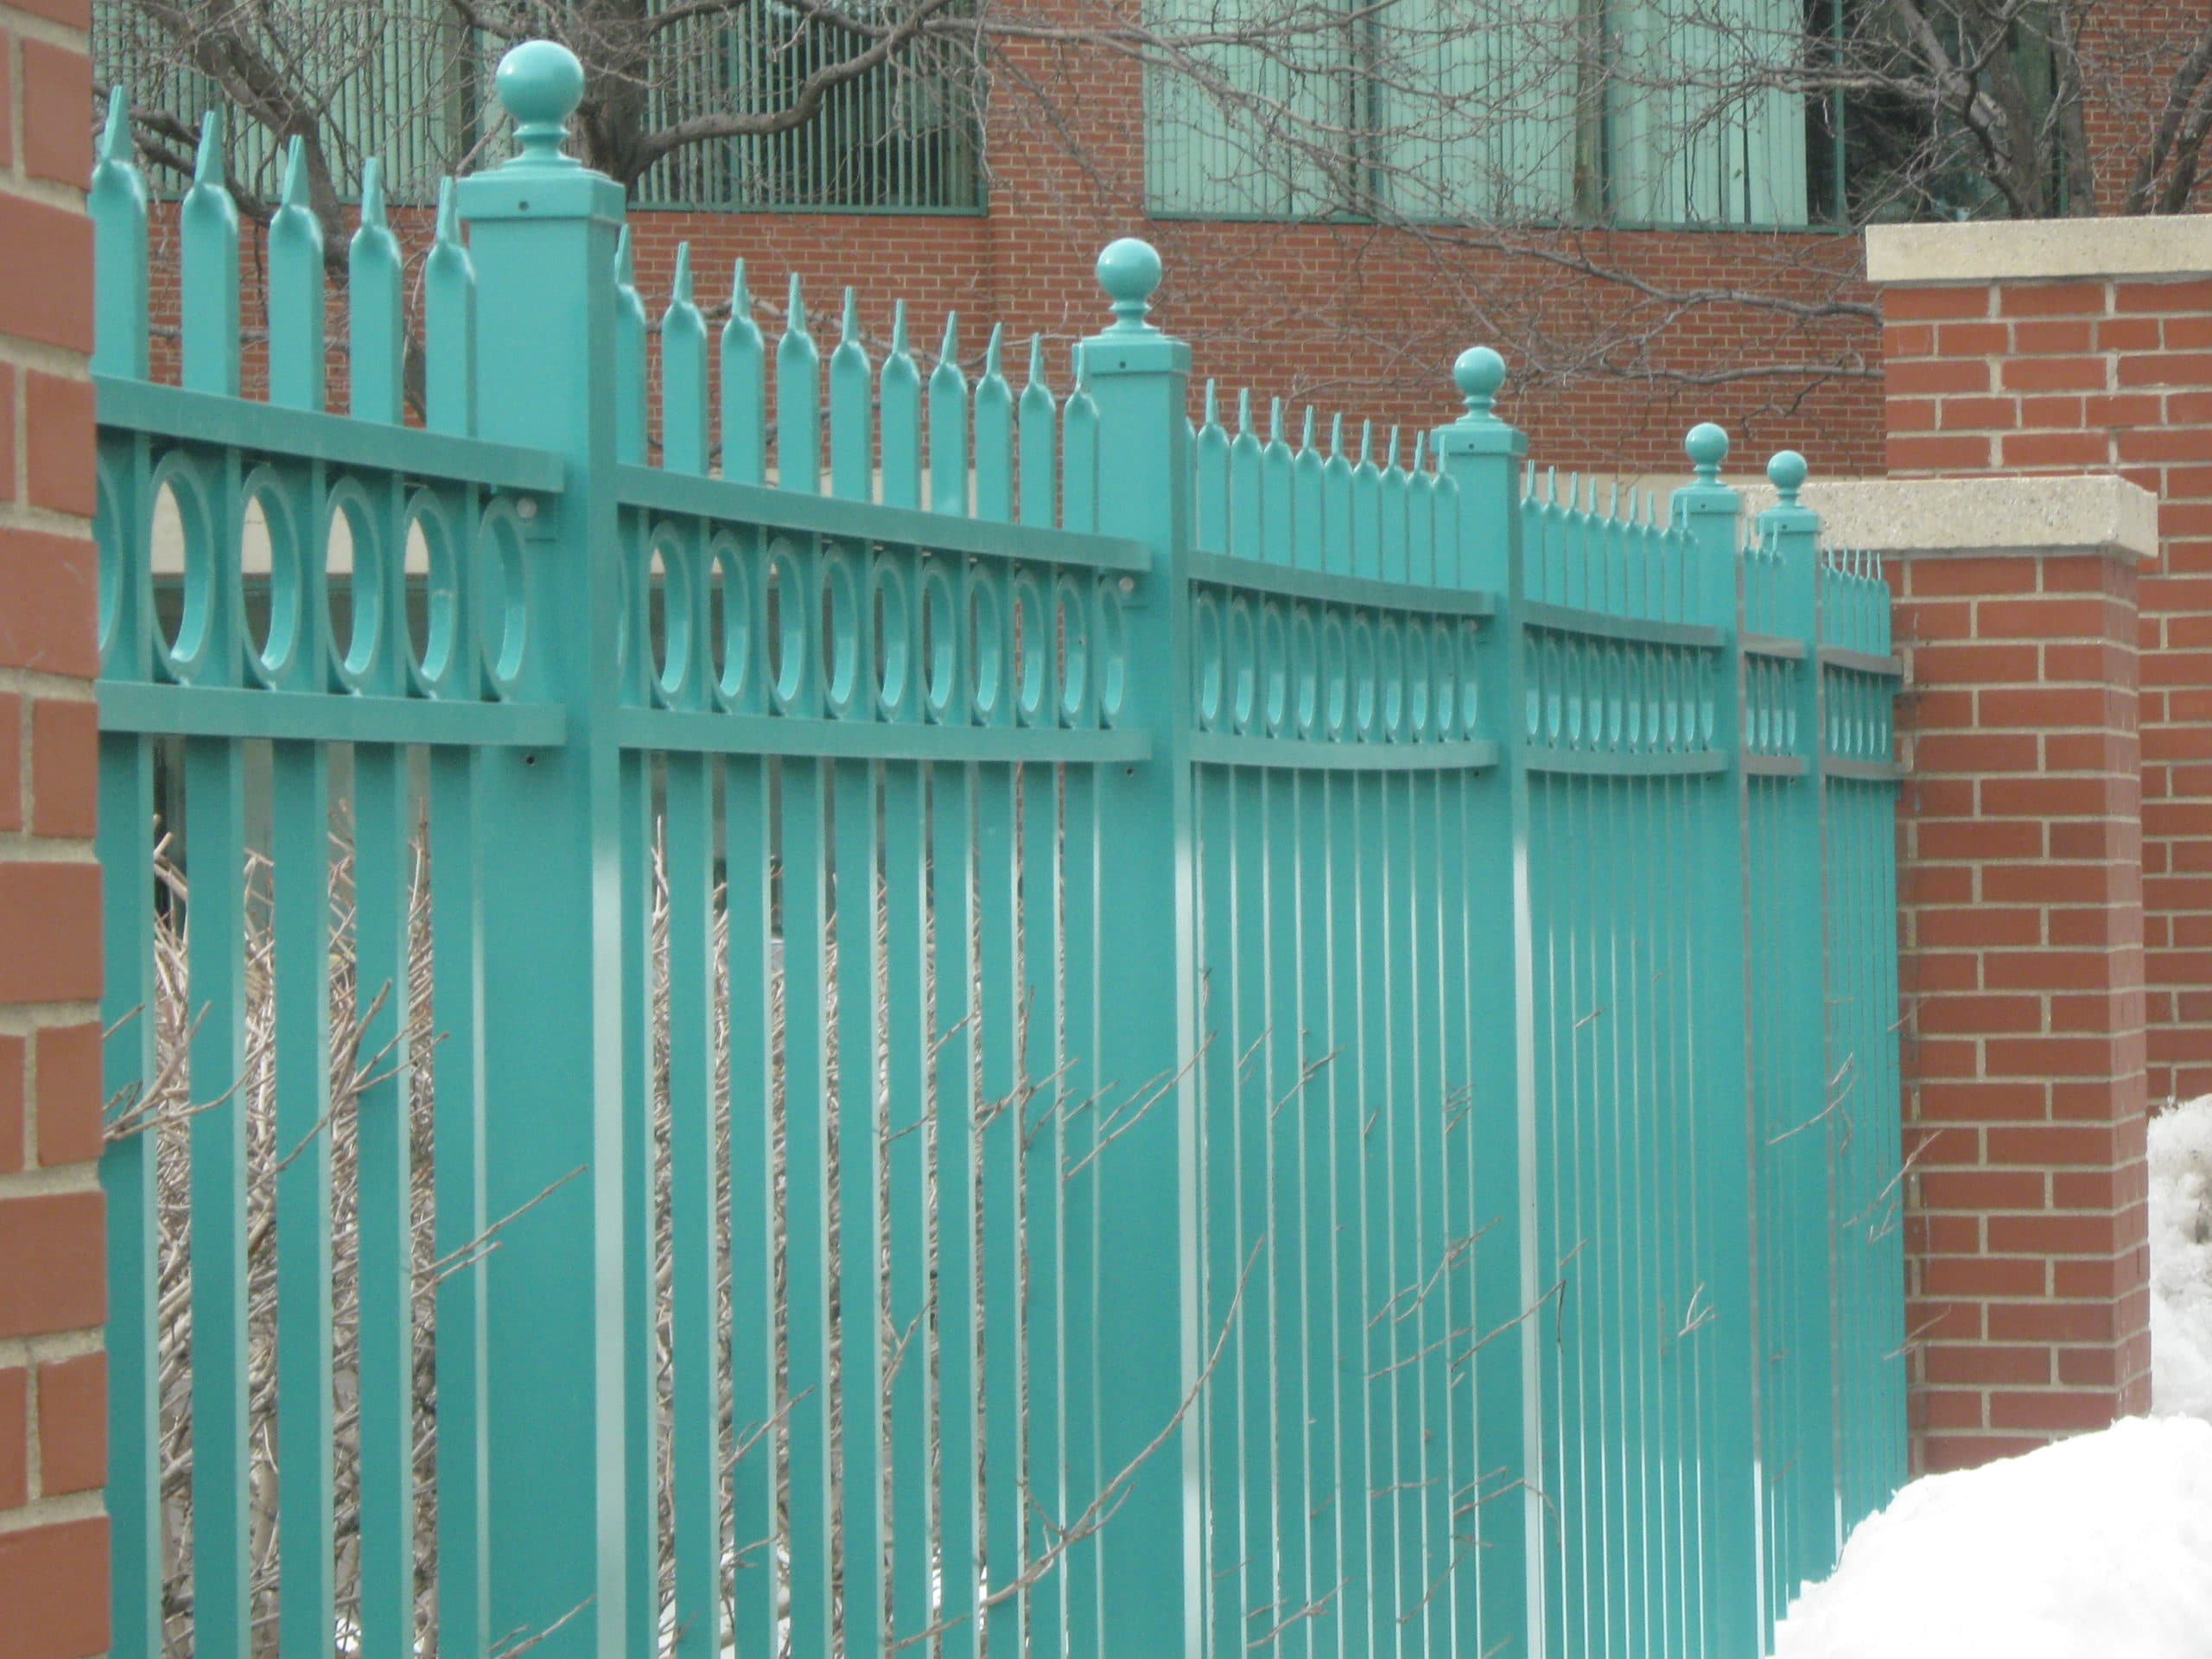 Image of commercial steel picket fencing in Metro Detroit, Michigan